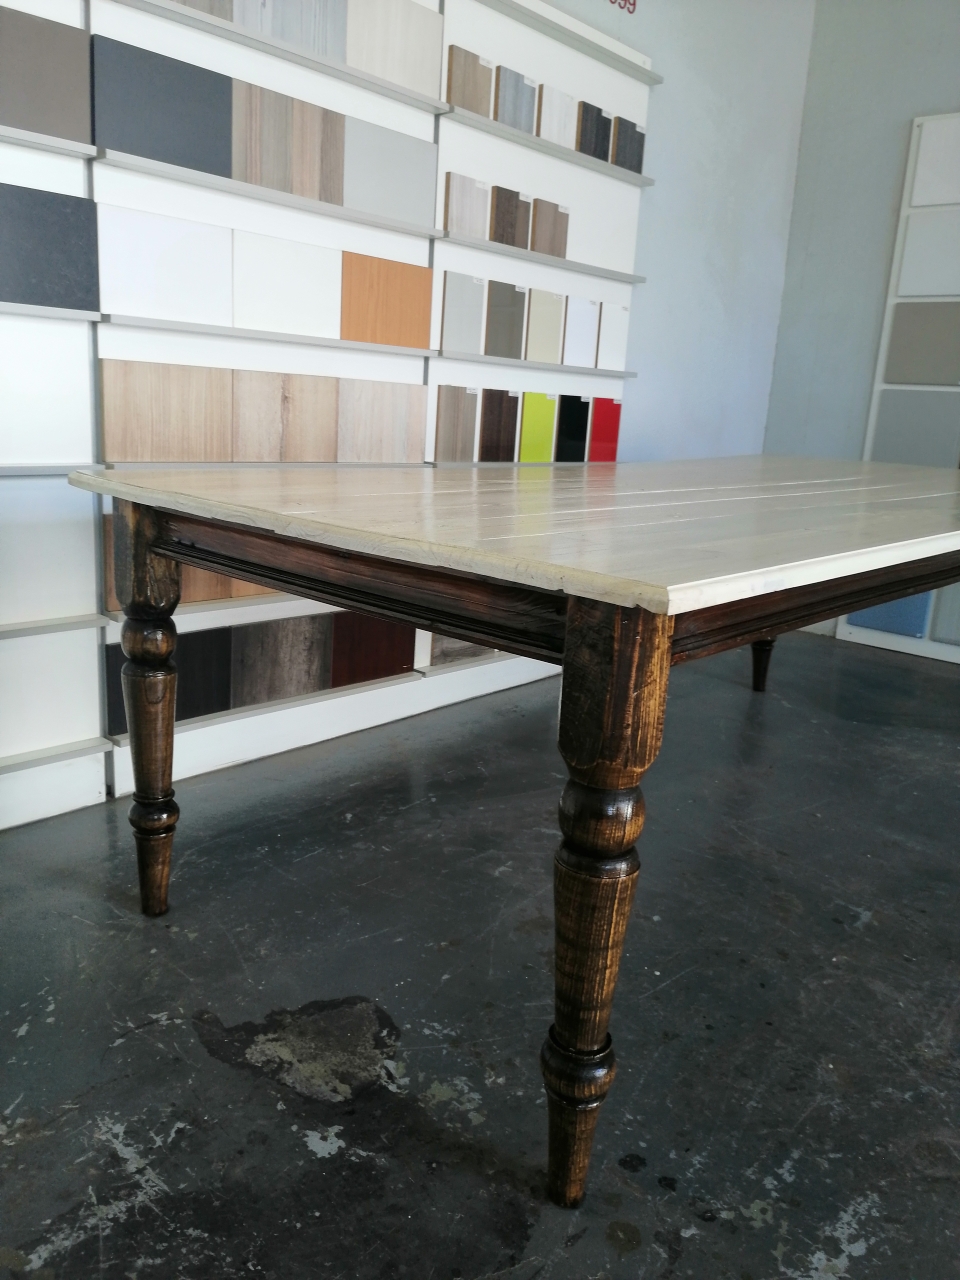 DINING ROOM OR LAPA TABLE-8 SEATER ASHWOOD LEGS AND WASHED PINE YOP